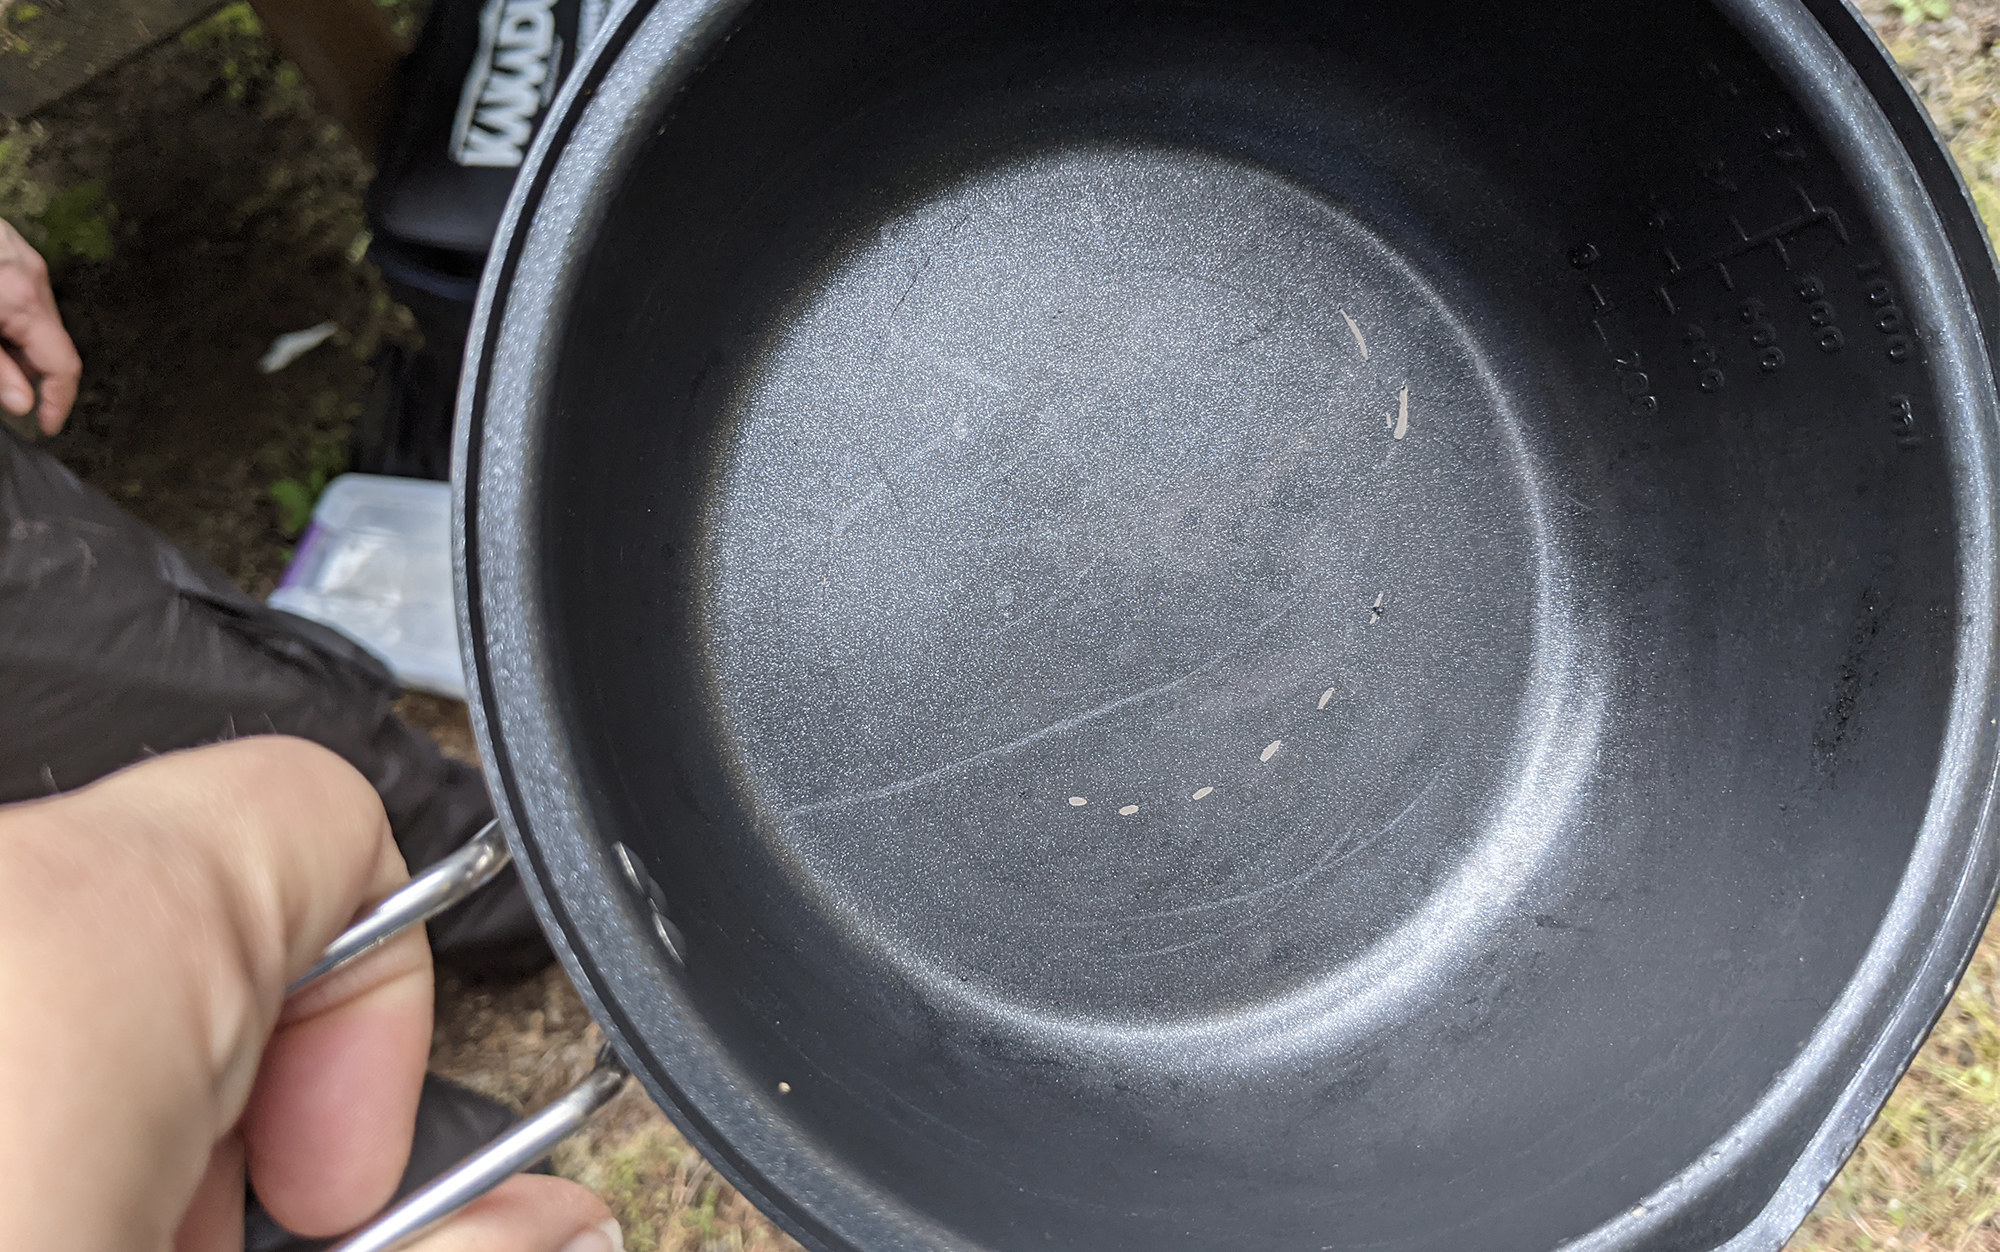 Scratched PTFE coating on camping cookware